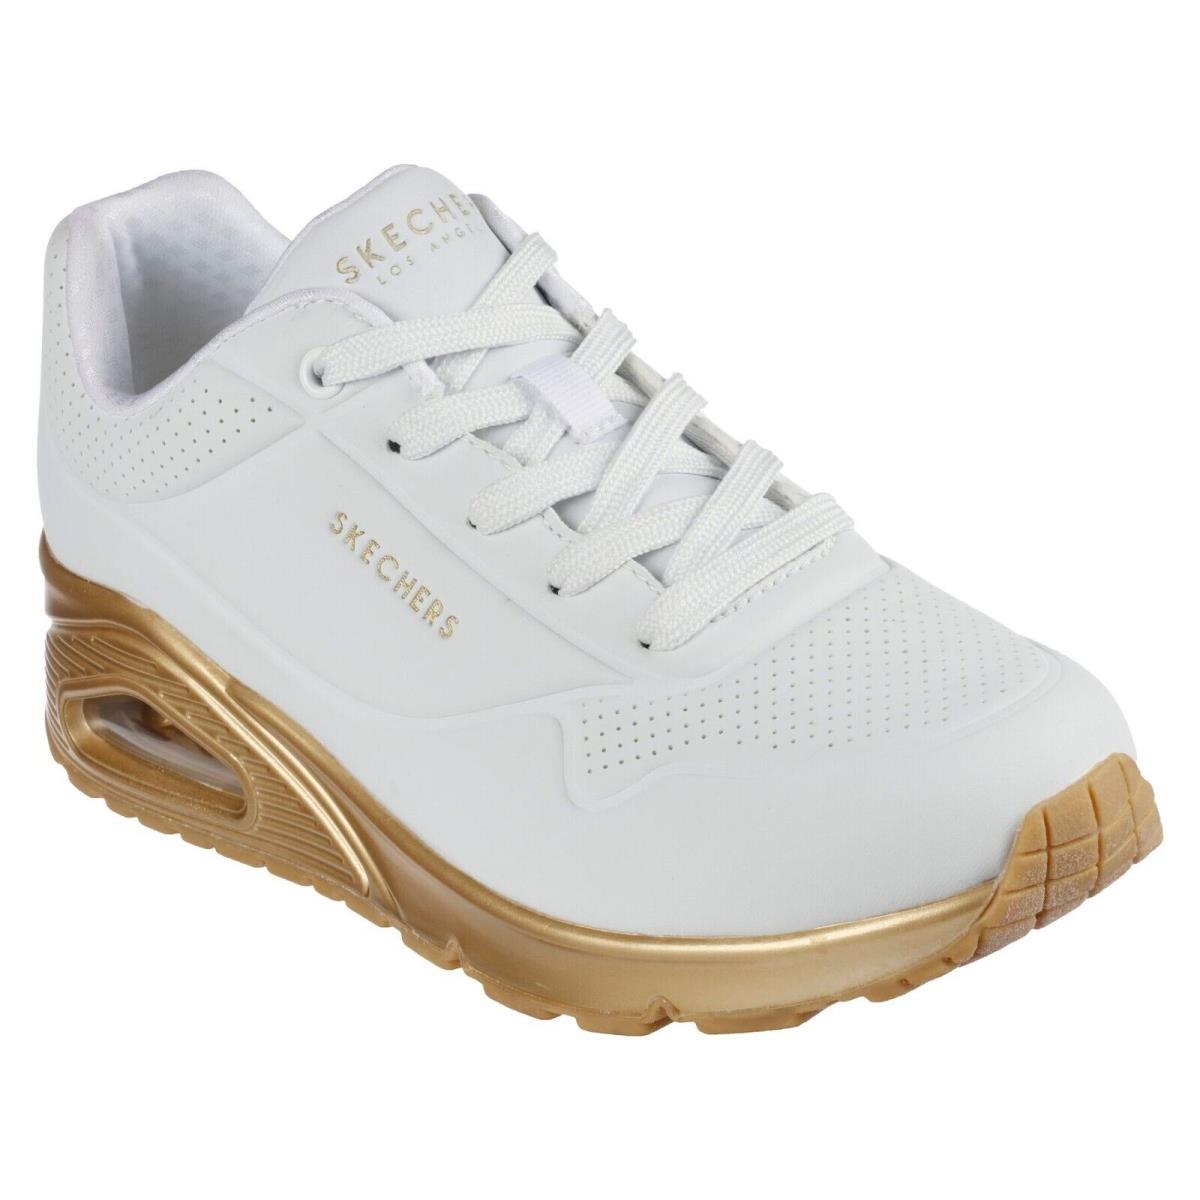 Skechers shoes Uno Gold Soul - White/Gold 5